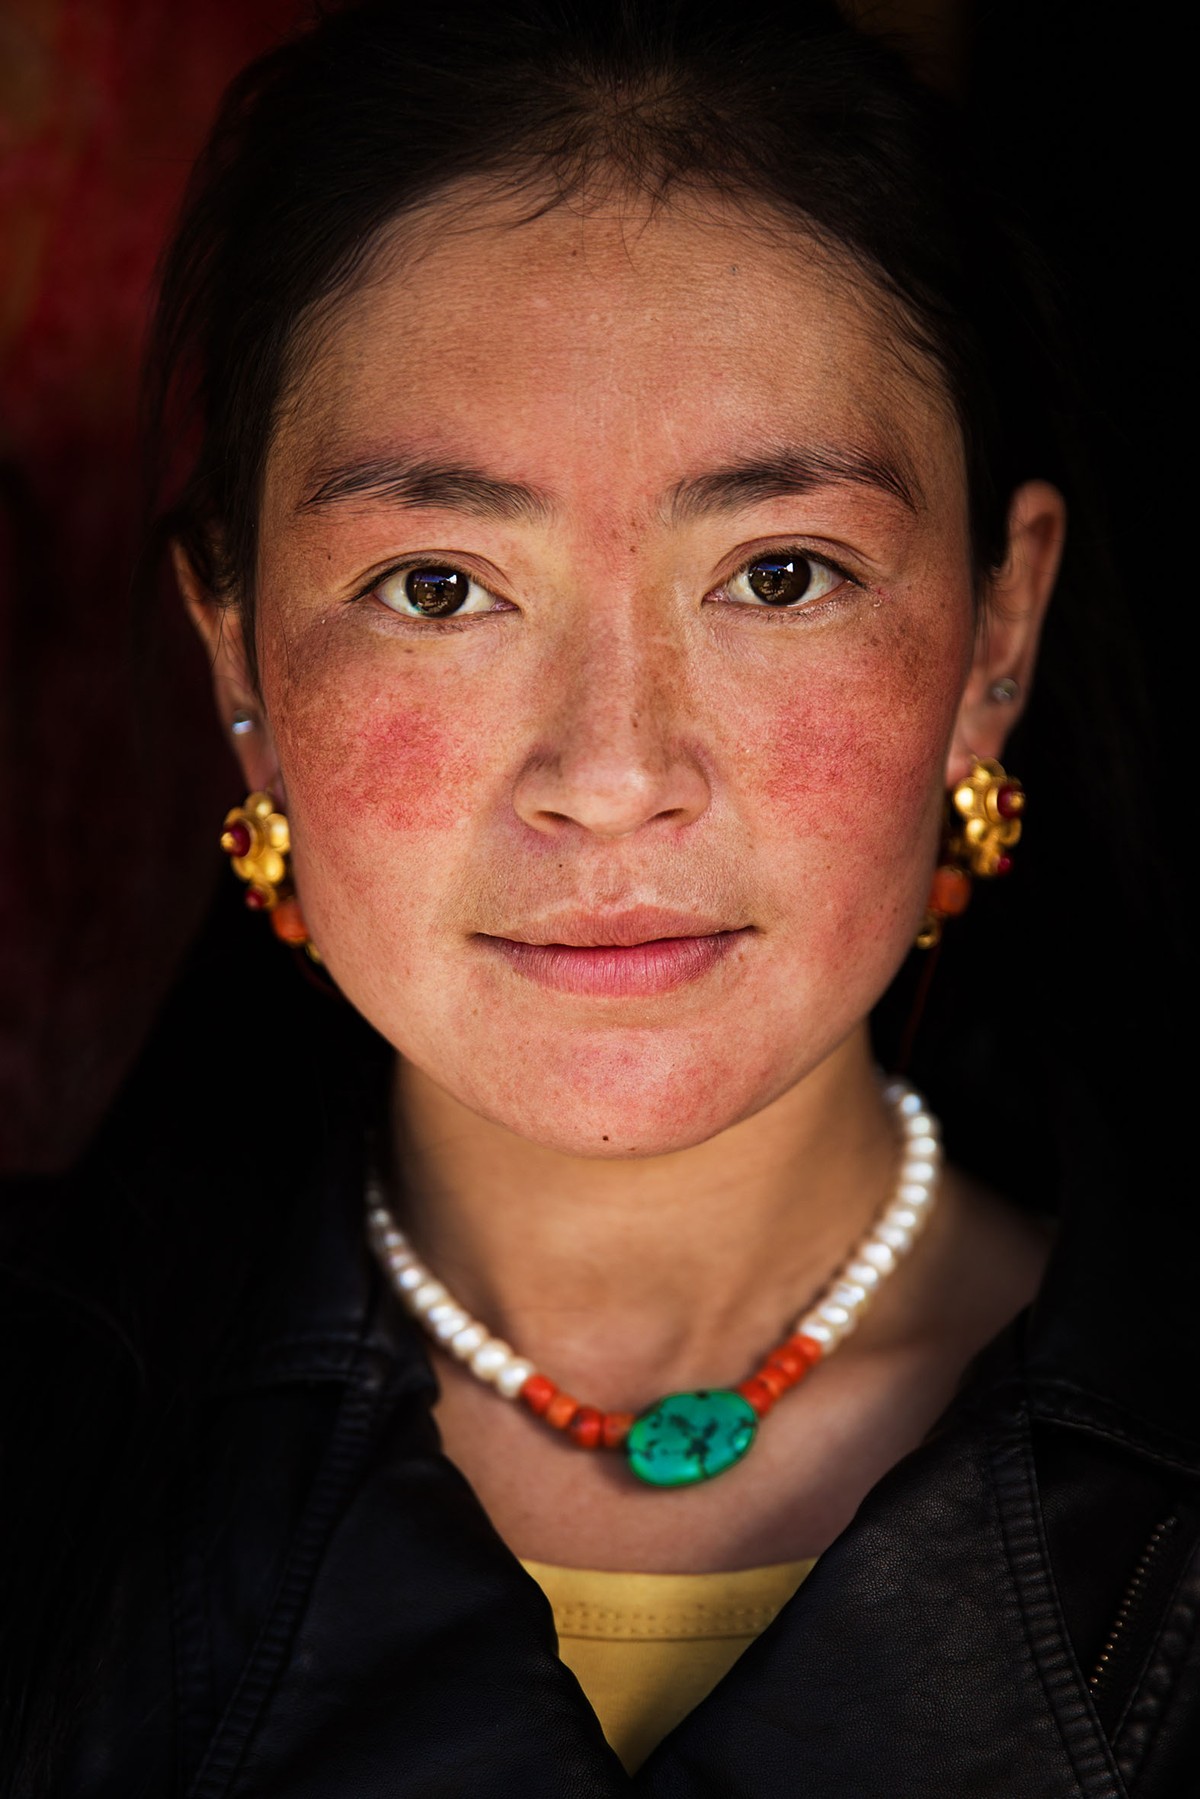 Atlas of Beauty: women and girls around the world – in pictures